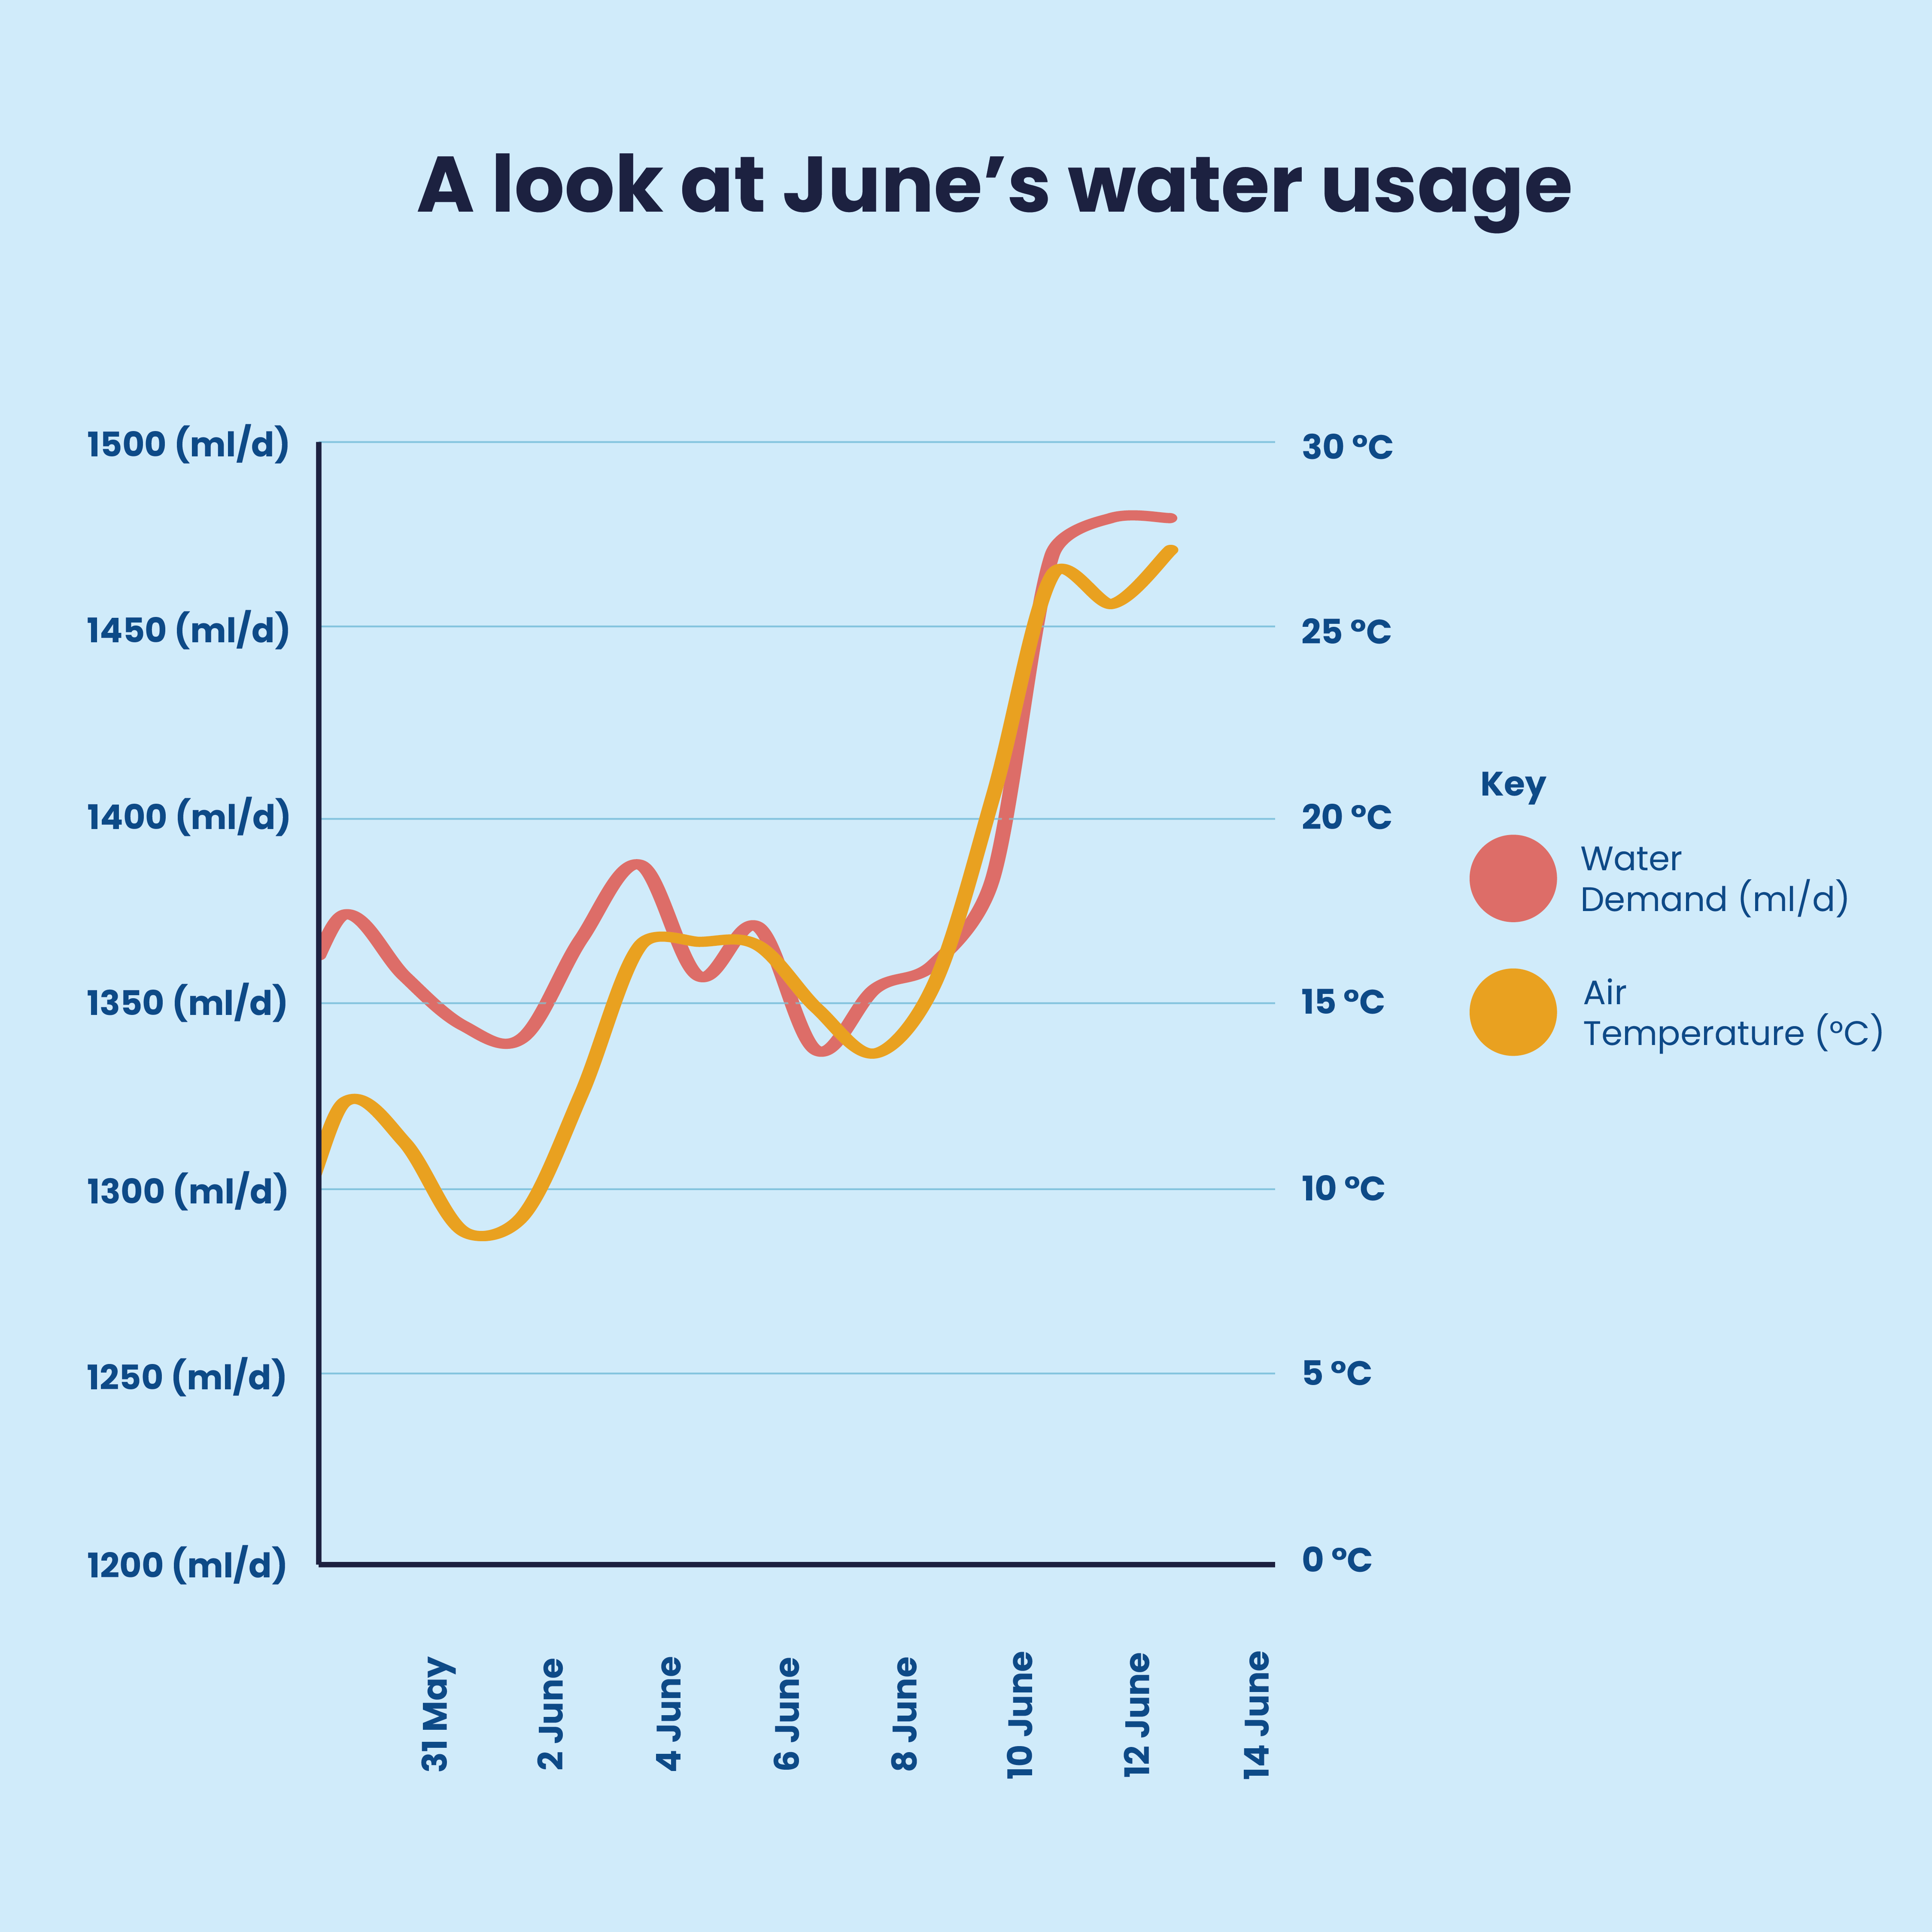 A graph showing water usage in June in comparison to air temperatures. It shows both metrics steadily increasing until 6th June when both leap, with temperature increasing by around 10 degrees and water usage increasing by around 130 ml/d